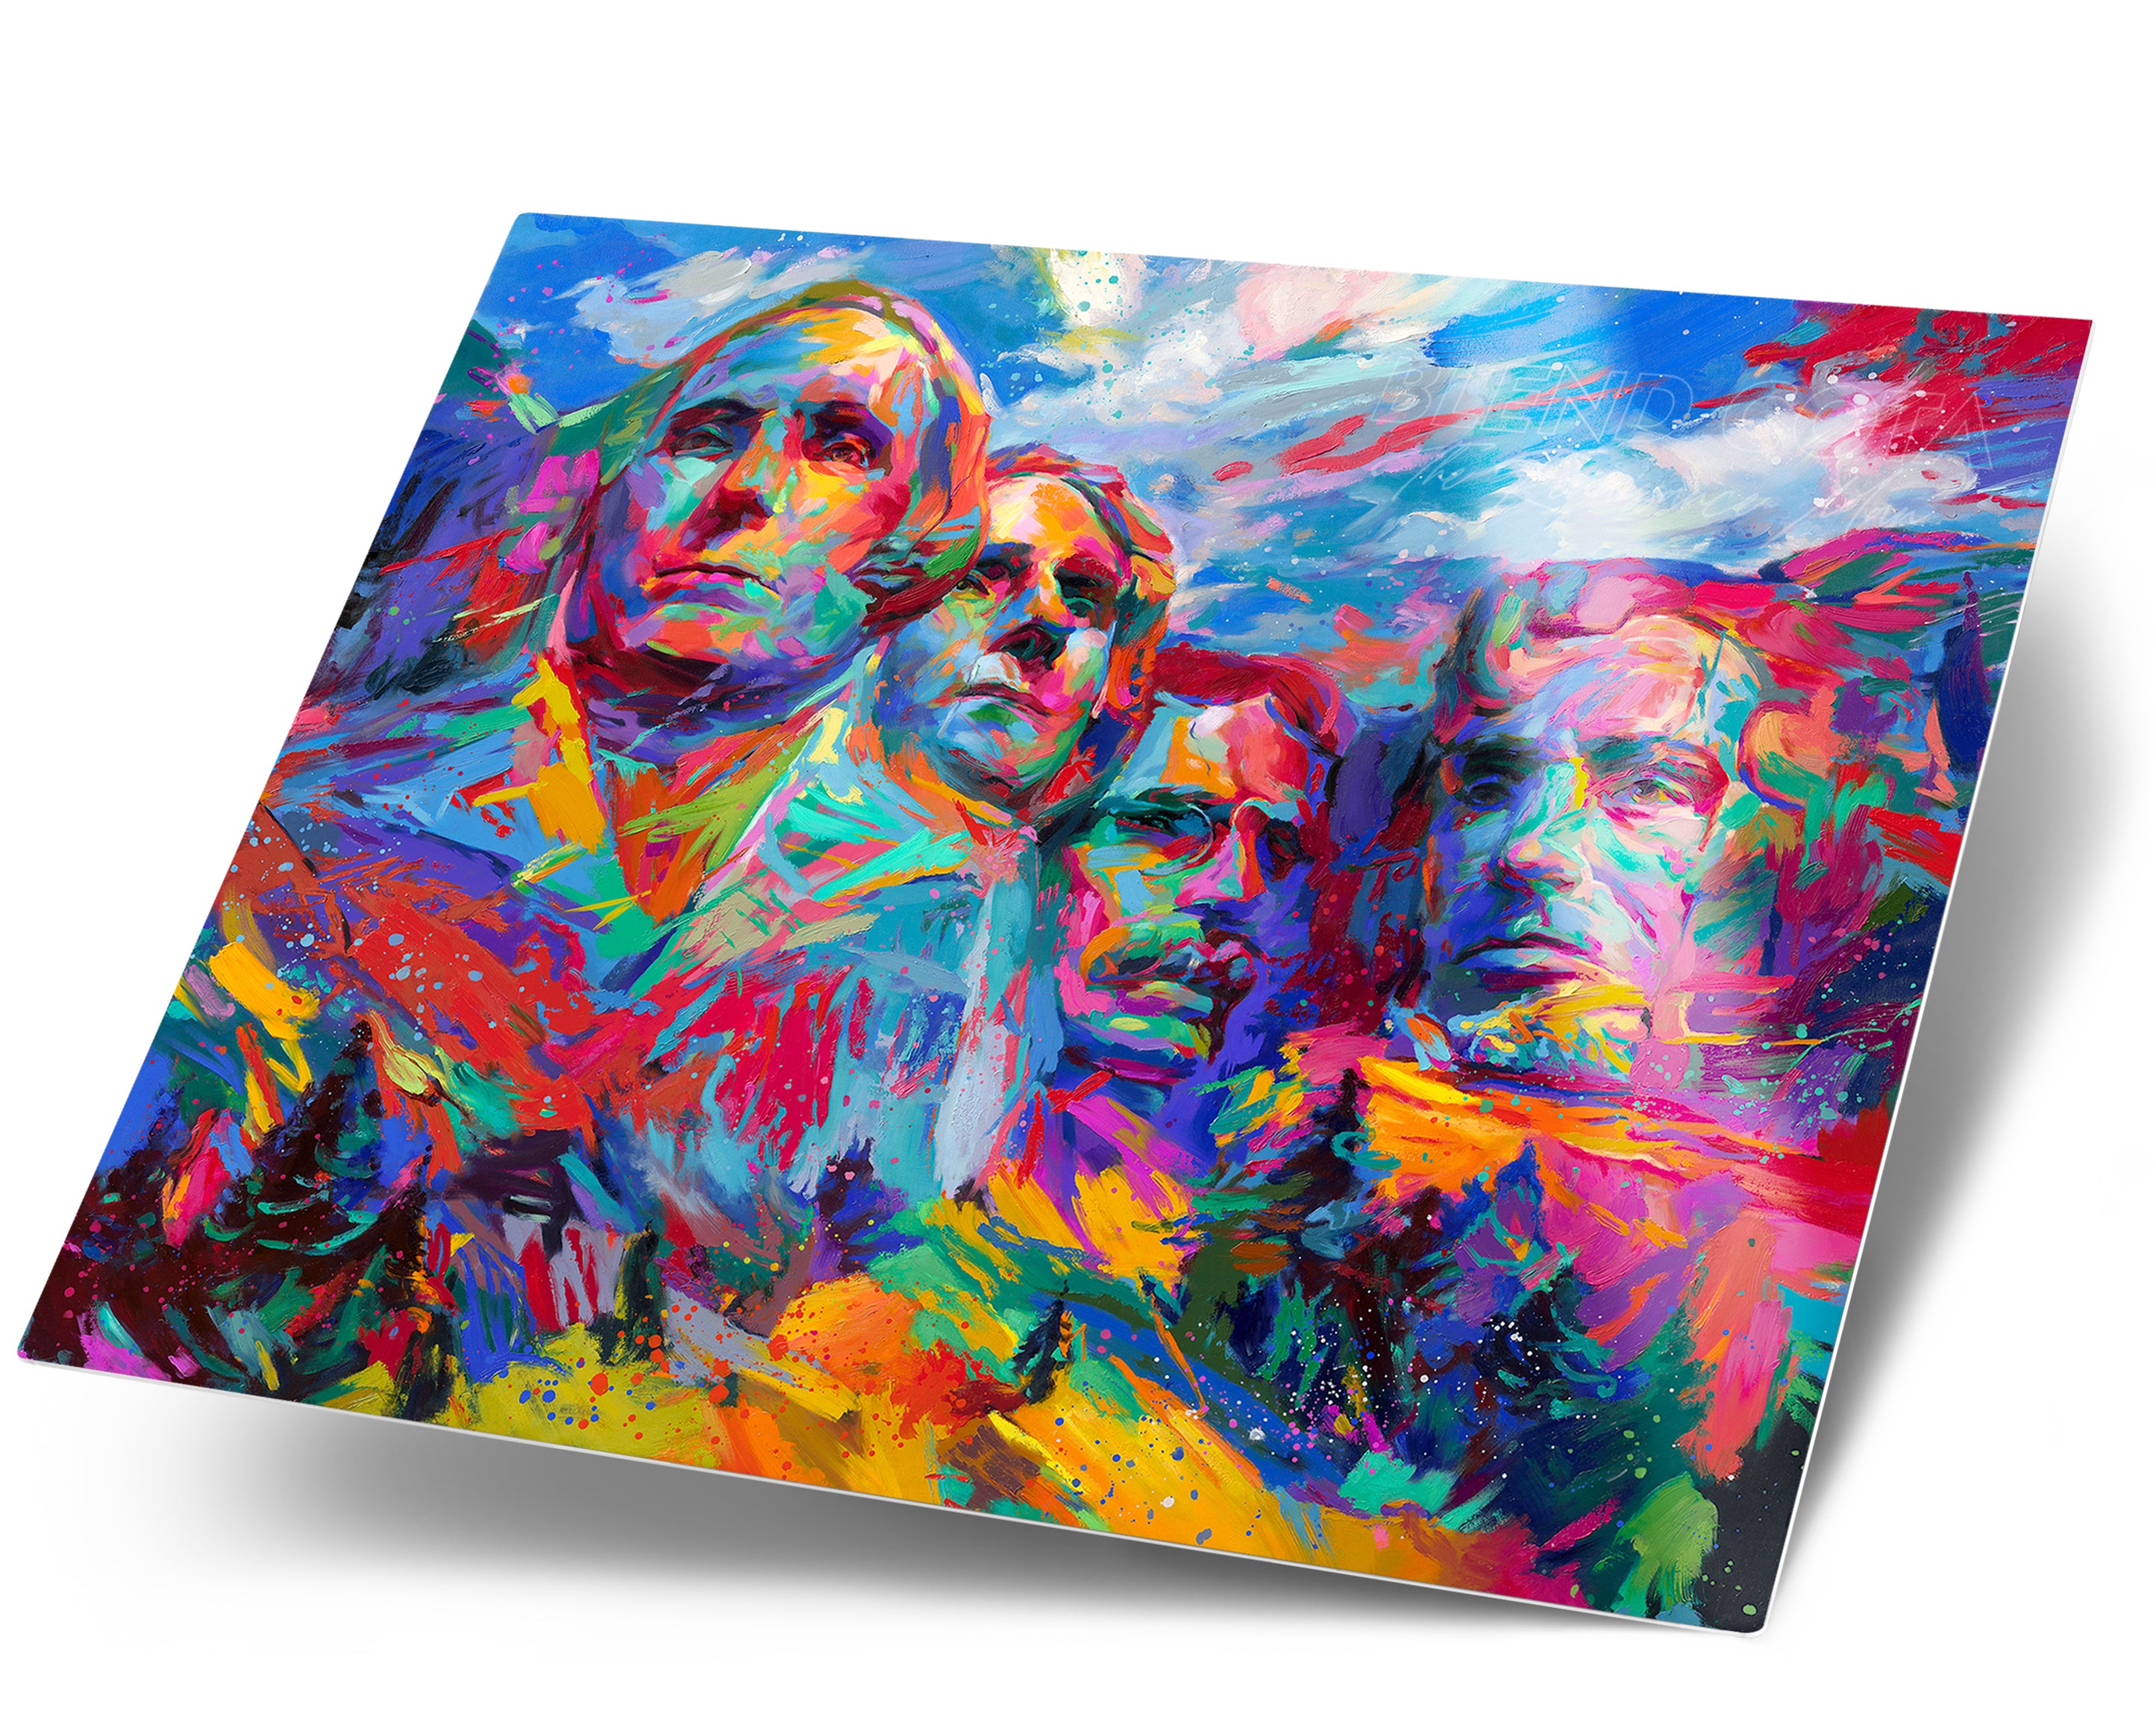 Mount Rushmore | Hope For a Brighter Future painted by Blend Cota Art Print on metal from Blend Cota Studios